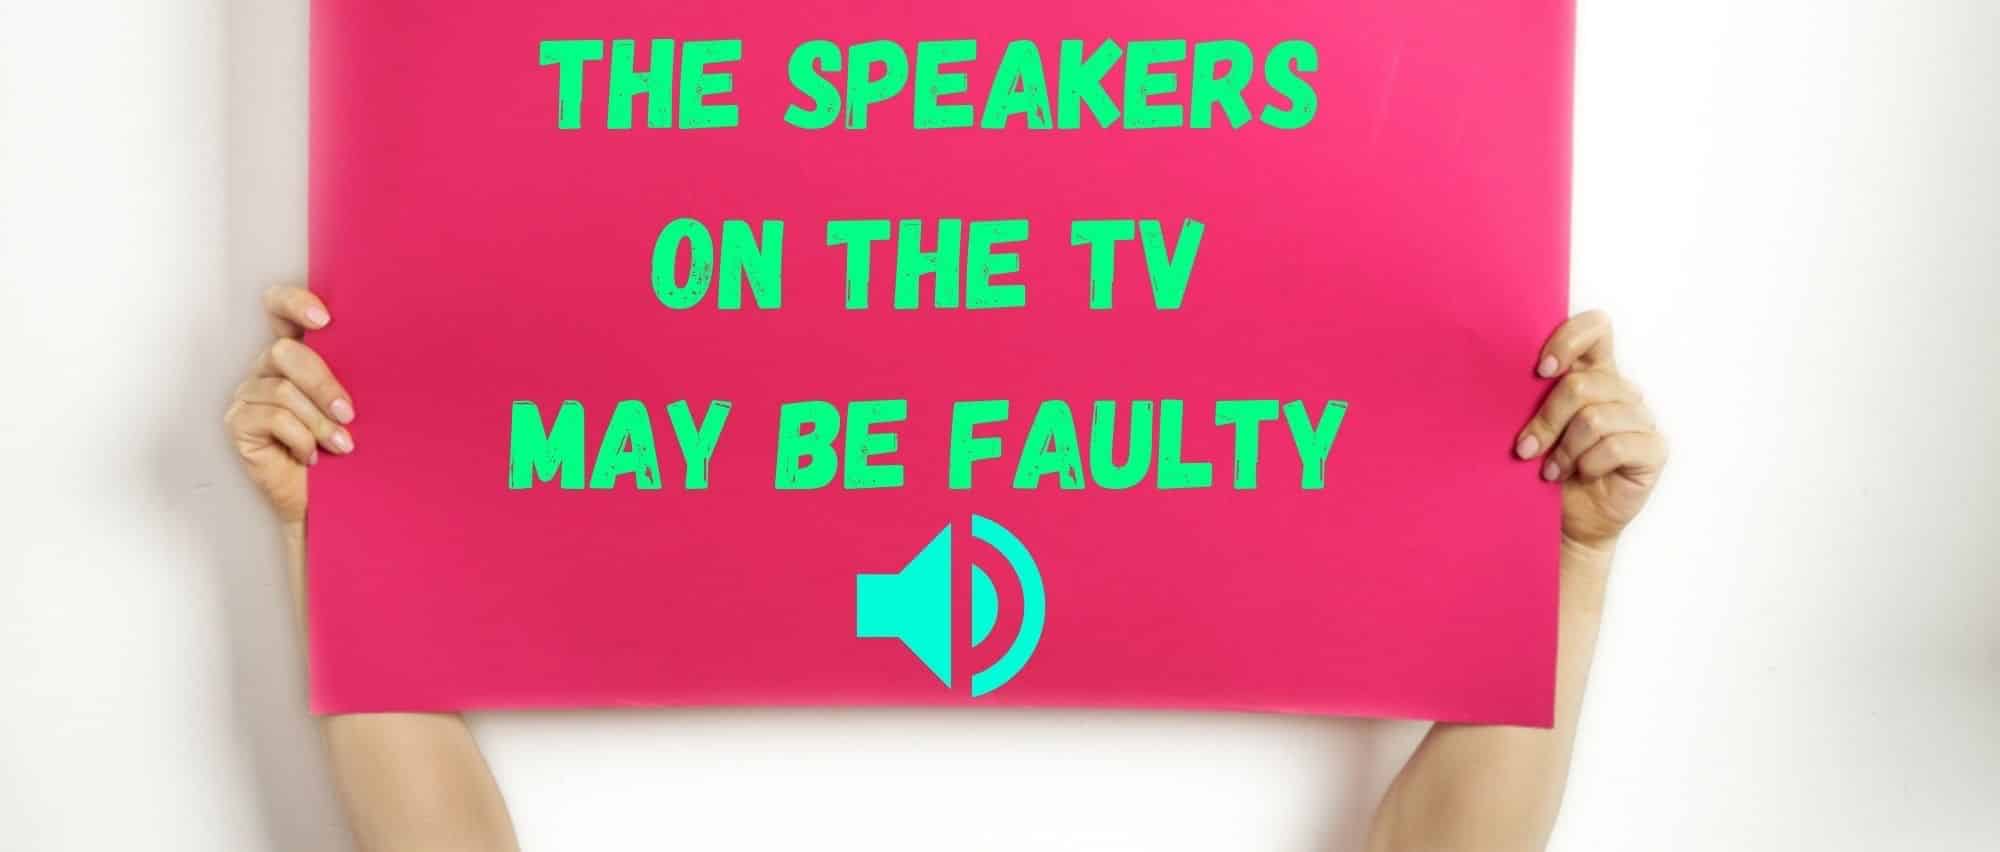 The speakers on the TV may be faulty 